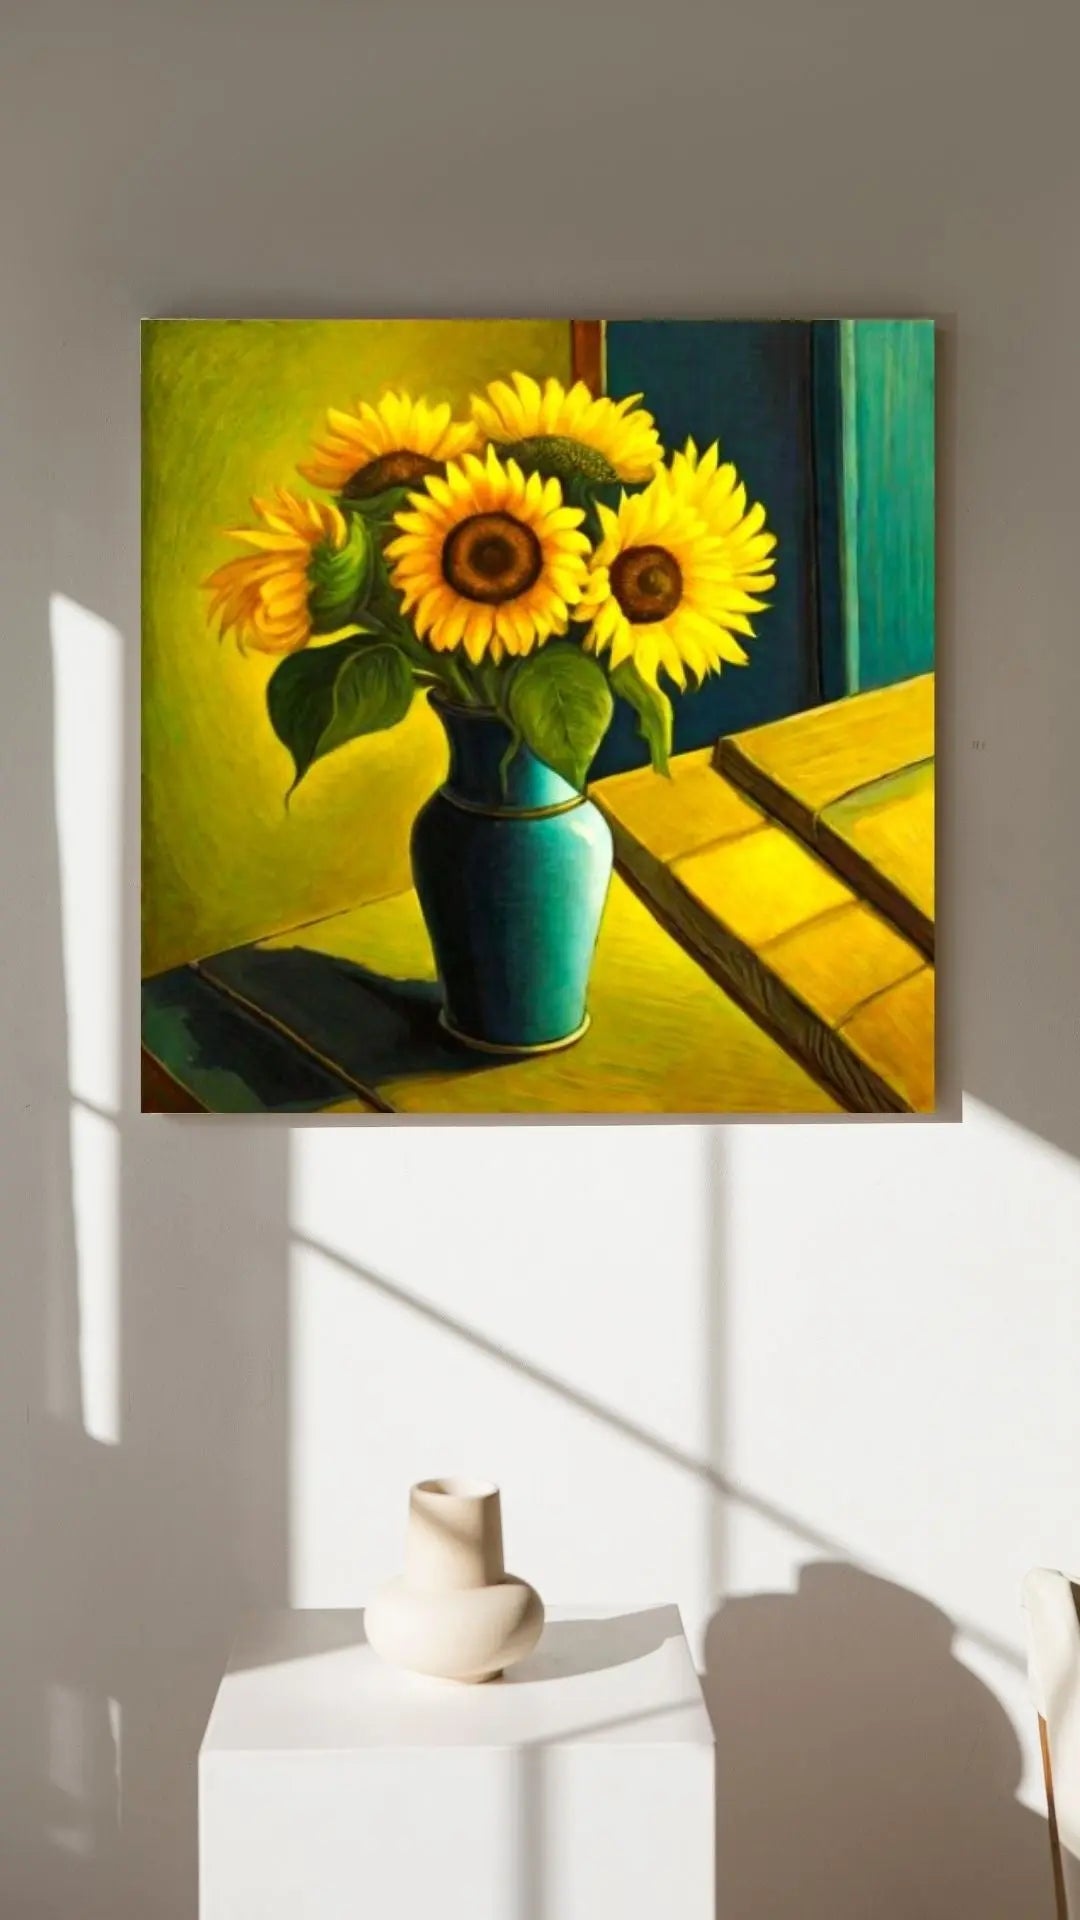 TAP PROMPT VAN GOGH "SUNFLOWER Series" Reimagined TRY A PROMPT